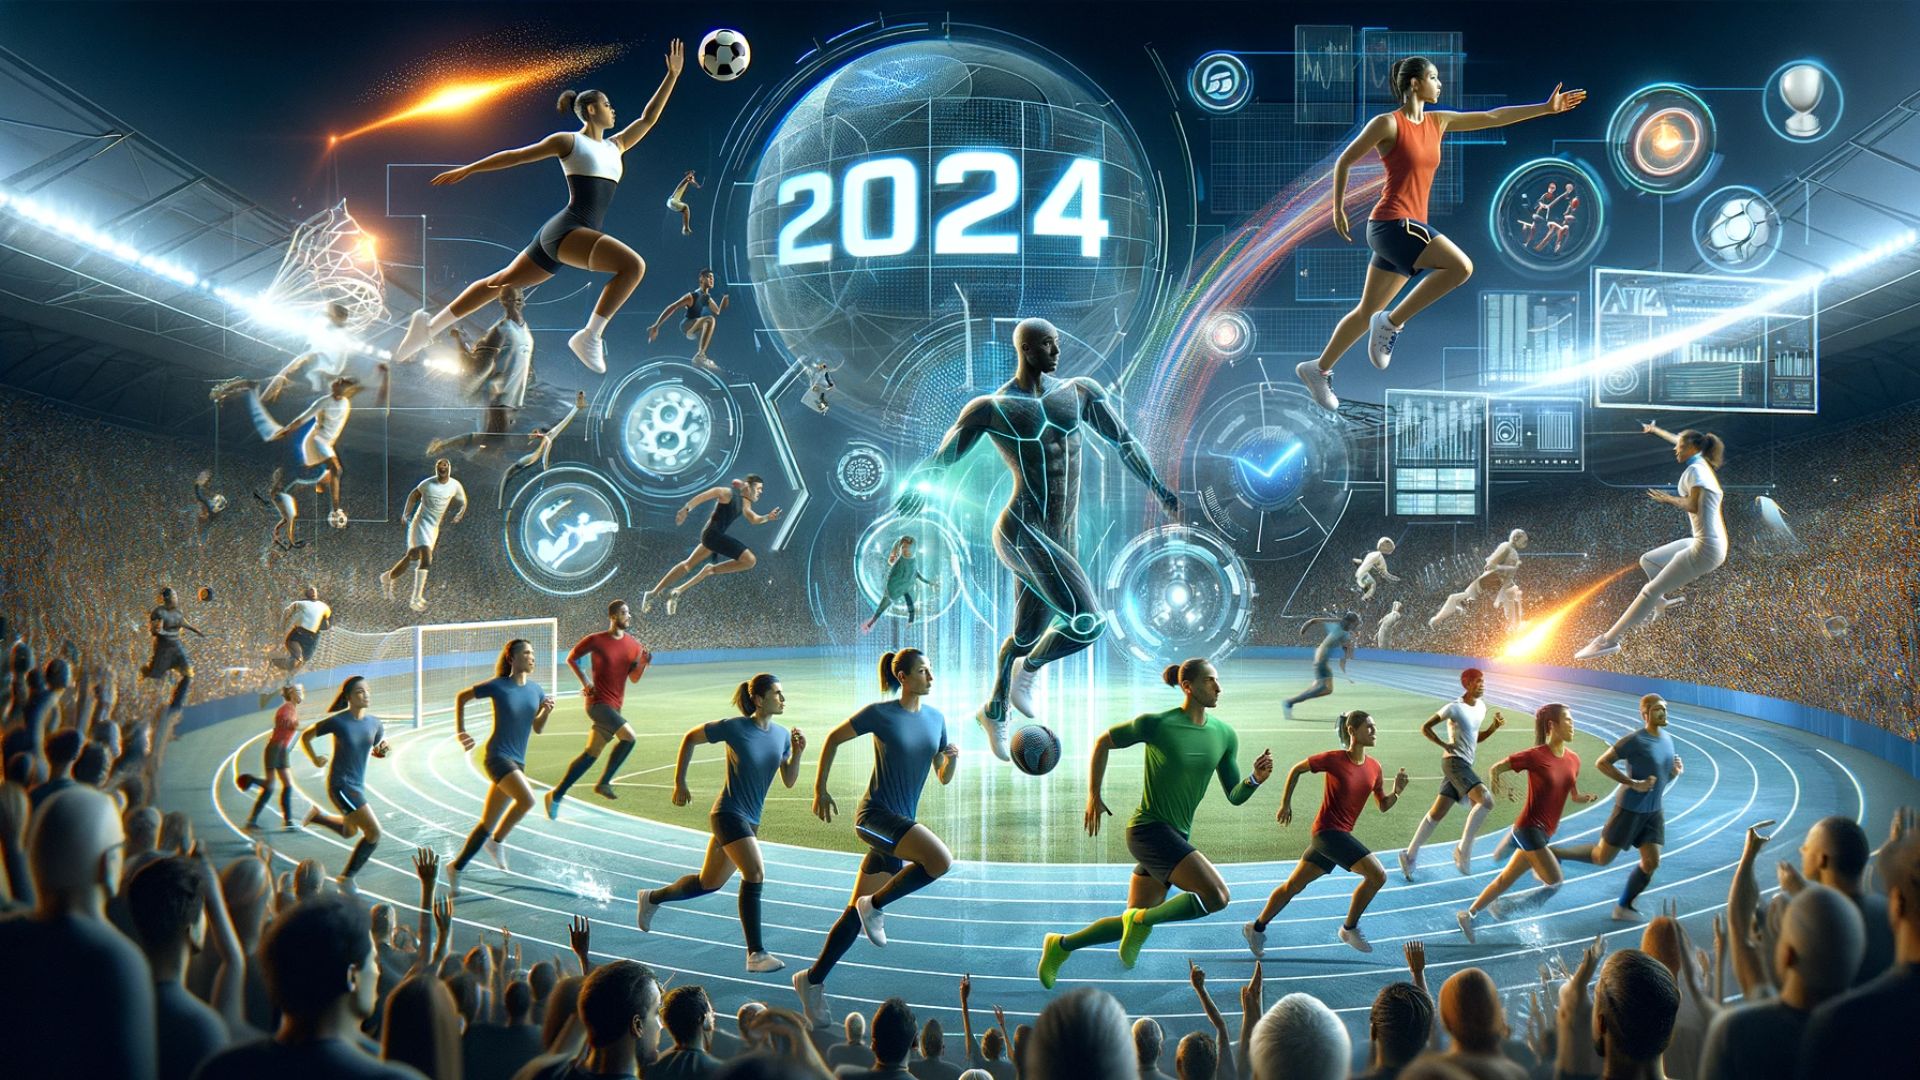 Top 5 Sports Events Corporate Companies Must Consider in 2024